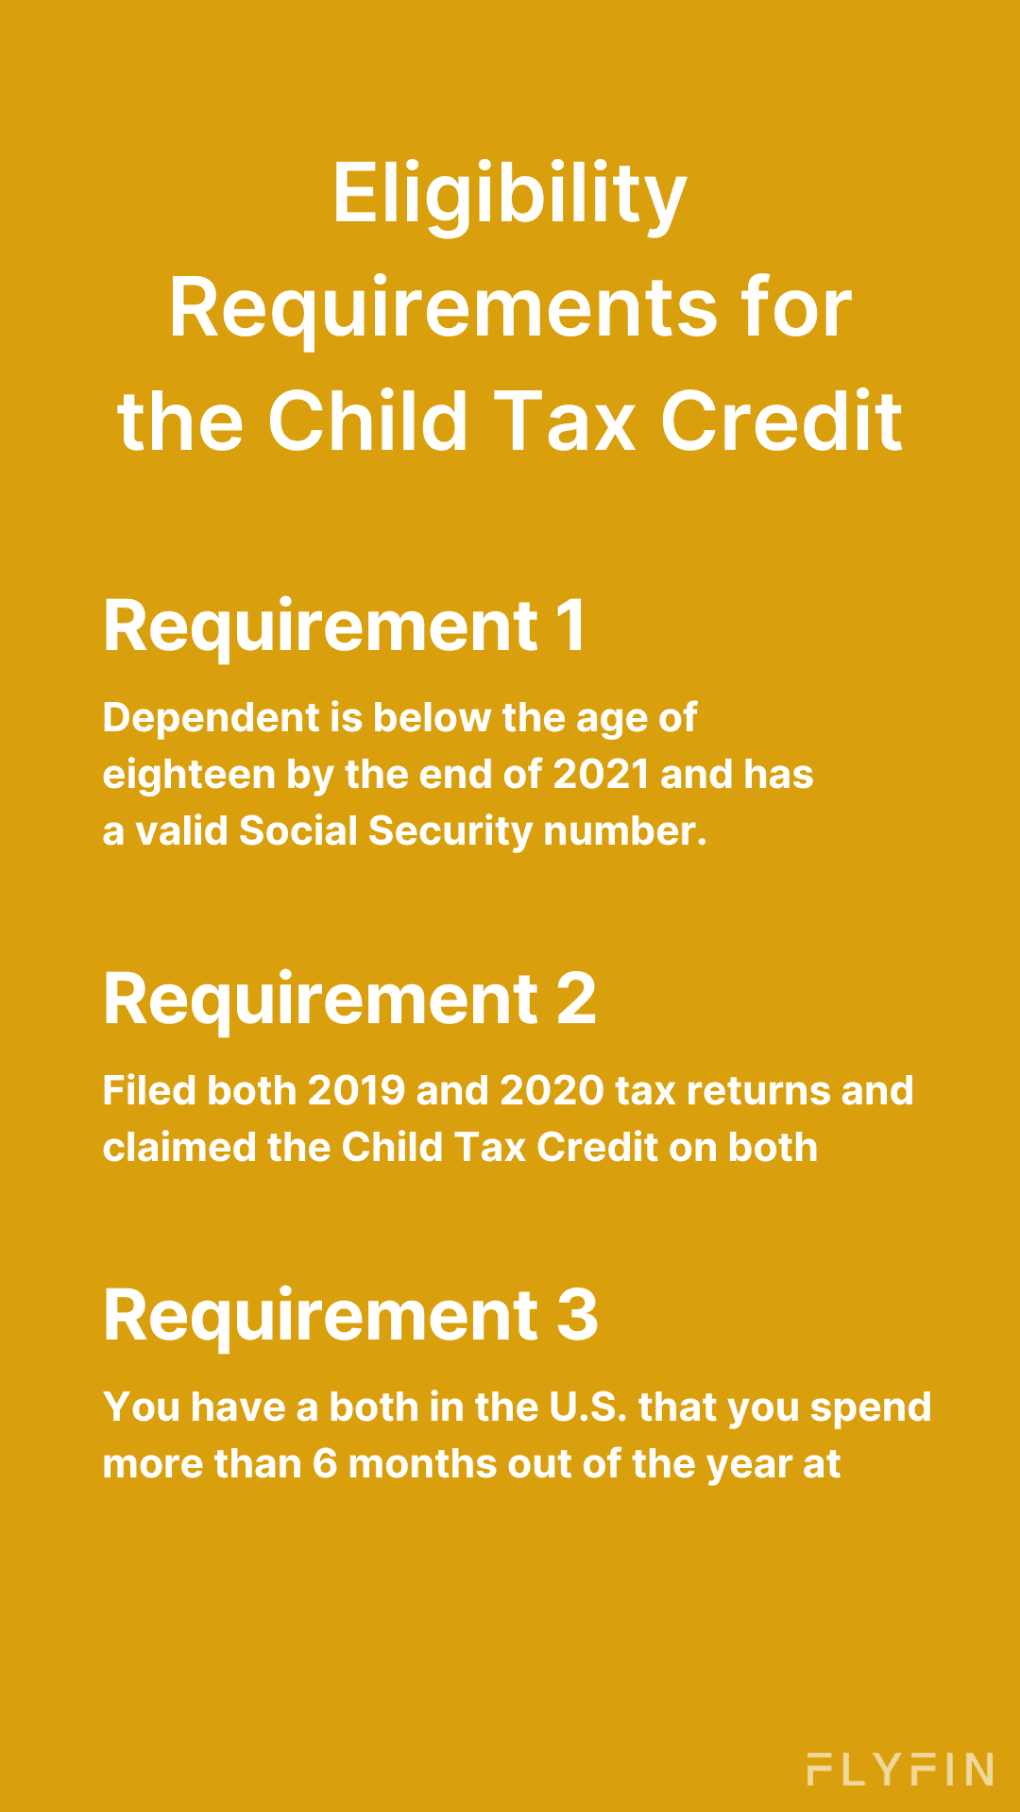 Eligibility requirements to receive the Child Tax Credit